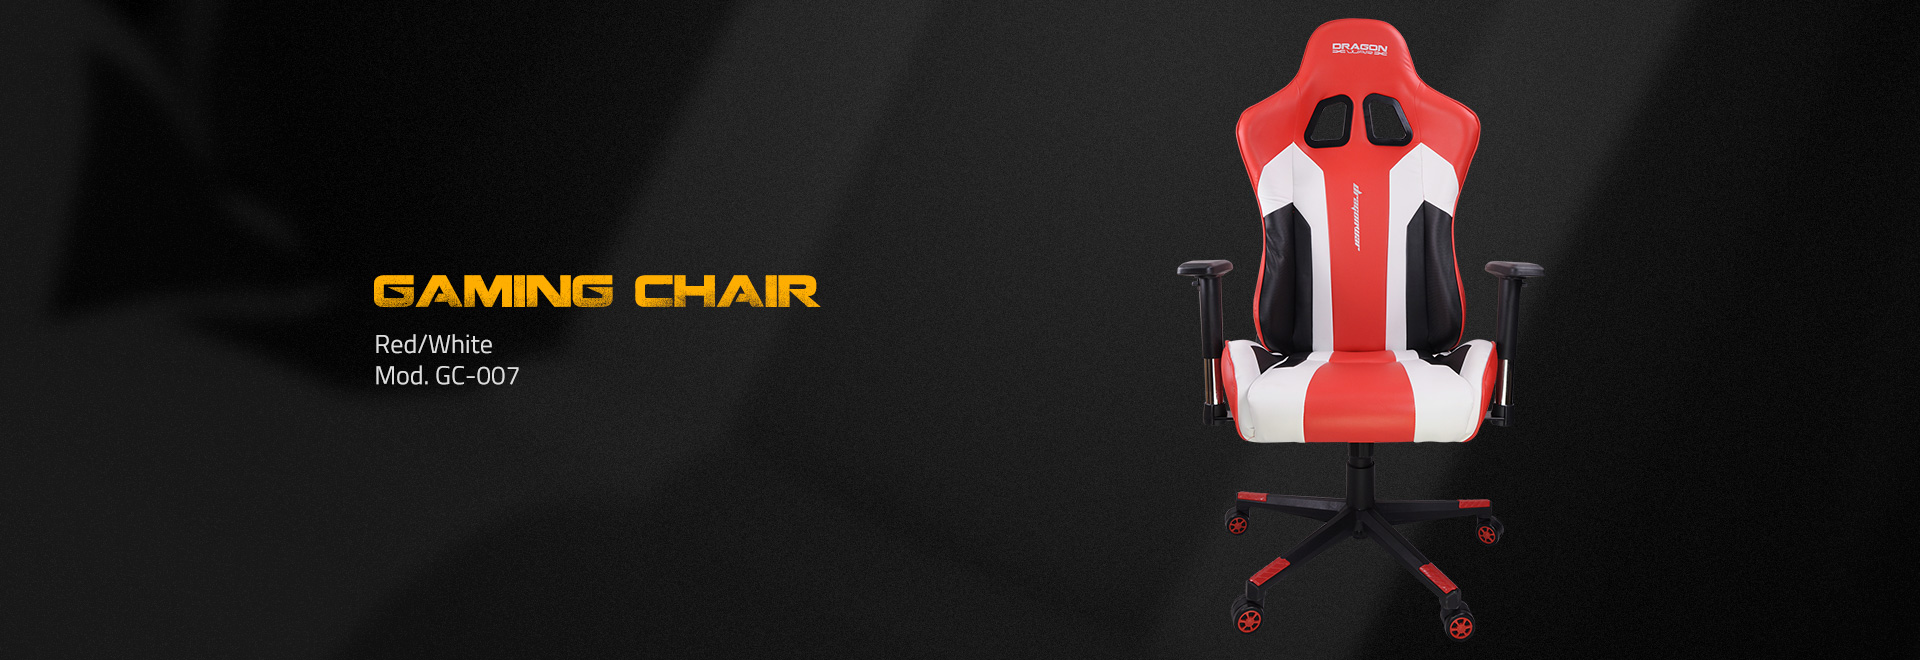 Silla Gaming Red/White GC-007 - Flyer: 0